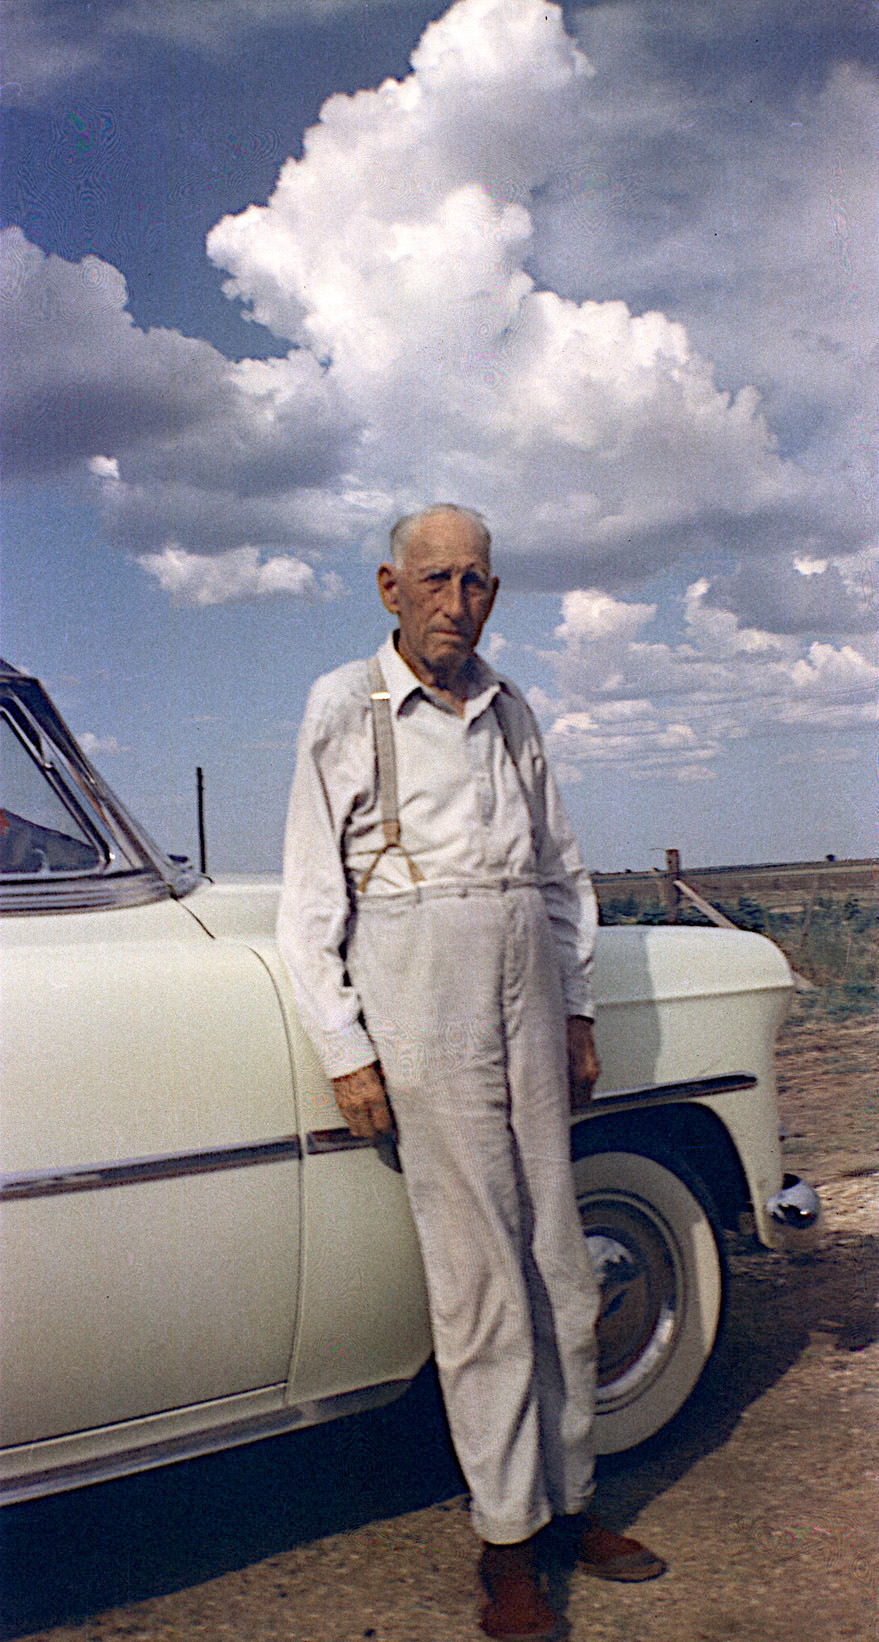 In a box of family photos I found some color negatives that were processed in 1954.  This is my Great Grandfather, James William Smiley.  These pics were taken in Parvin, Texas. View full size.